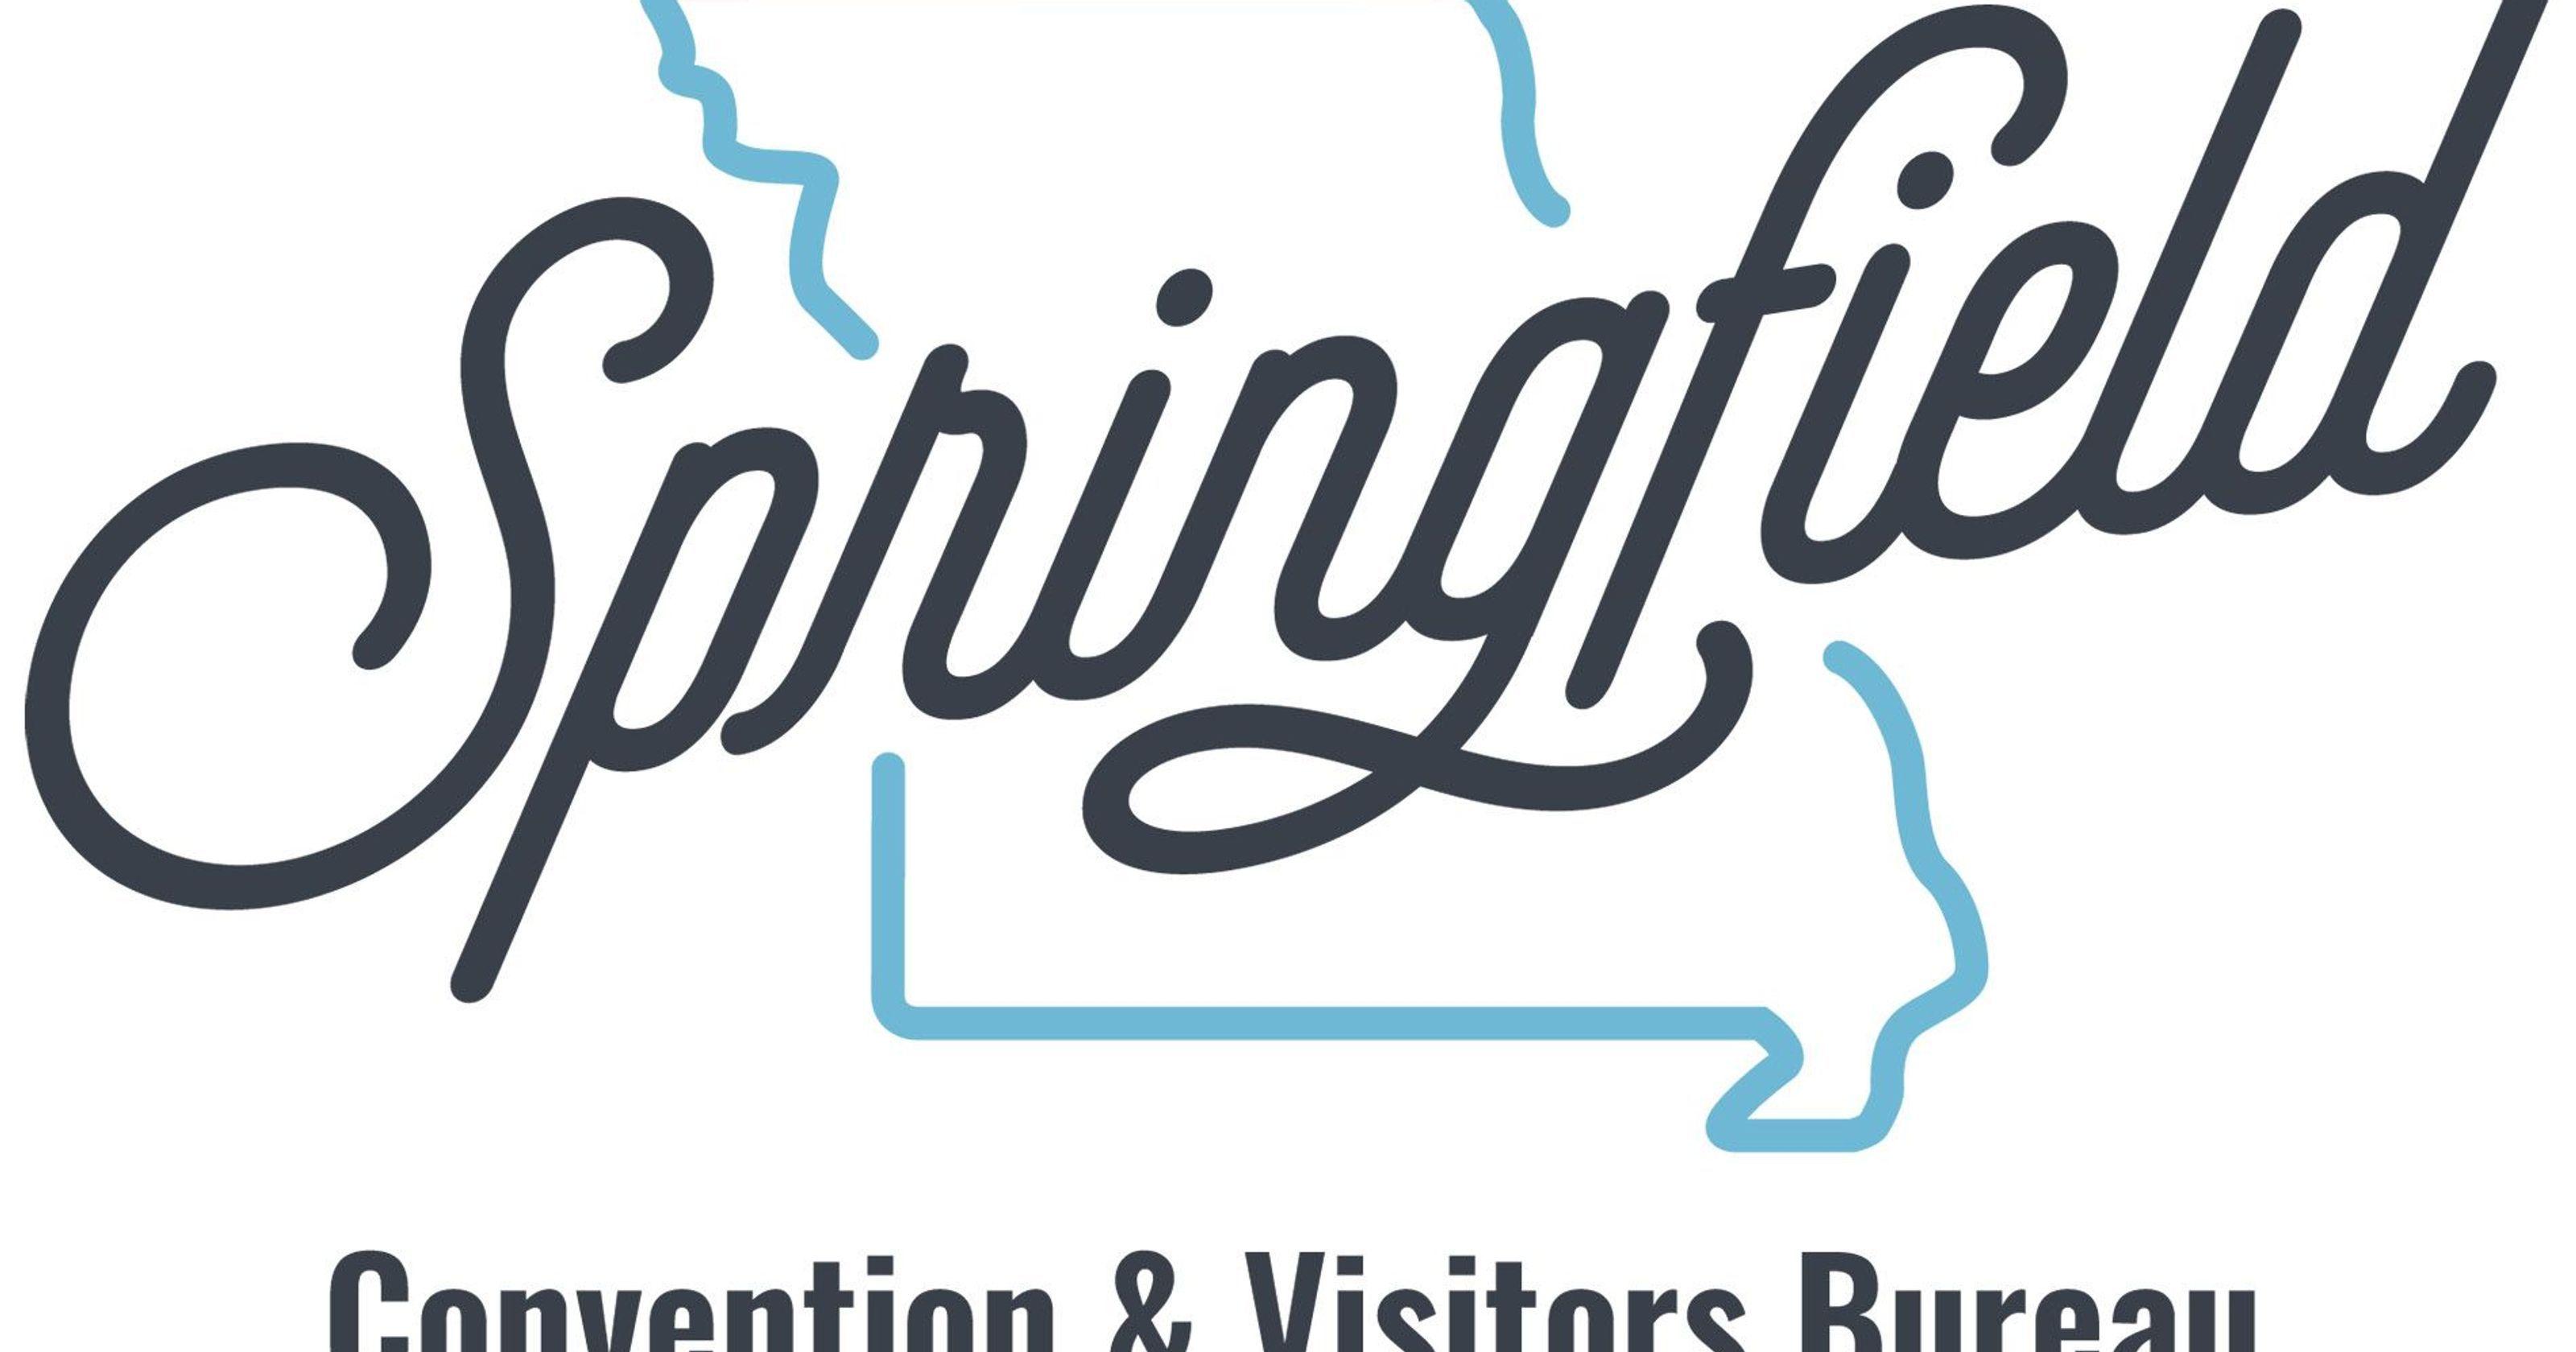 Springfield Logo - Does this logo make you want to visit Springfield?